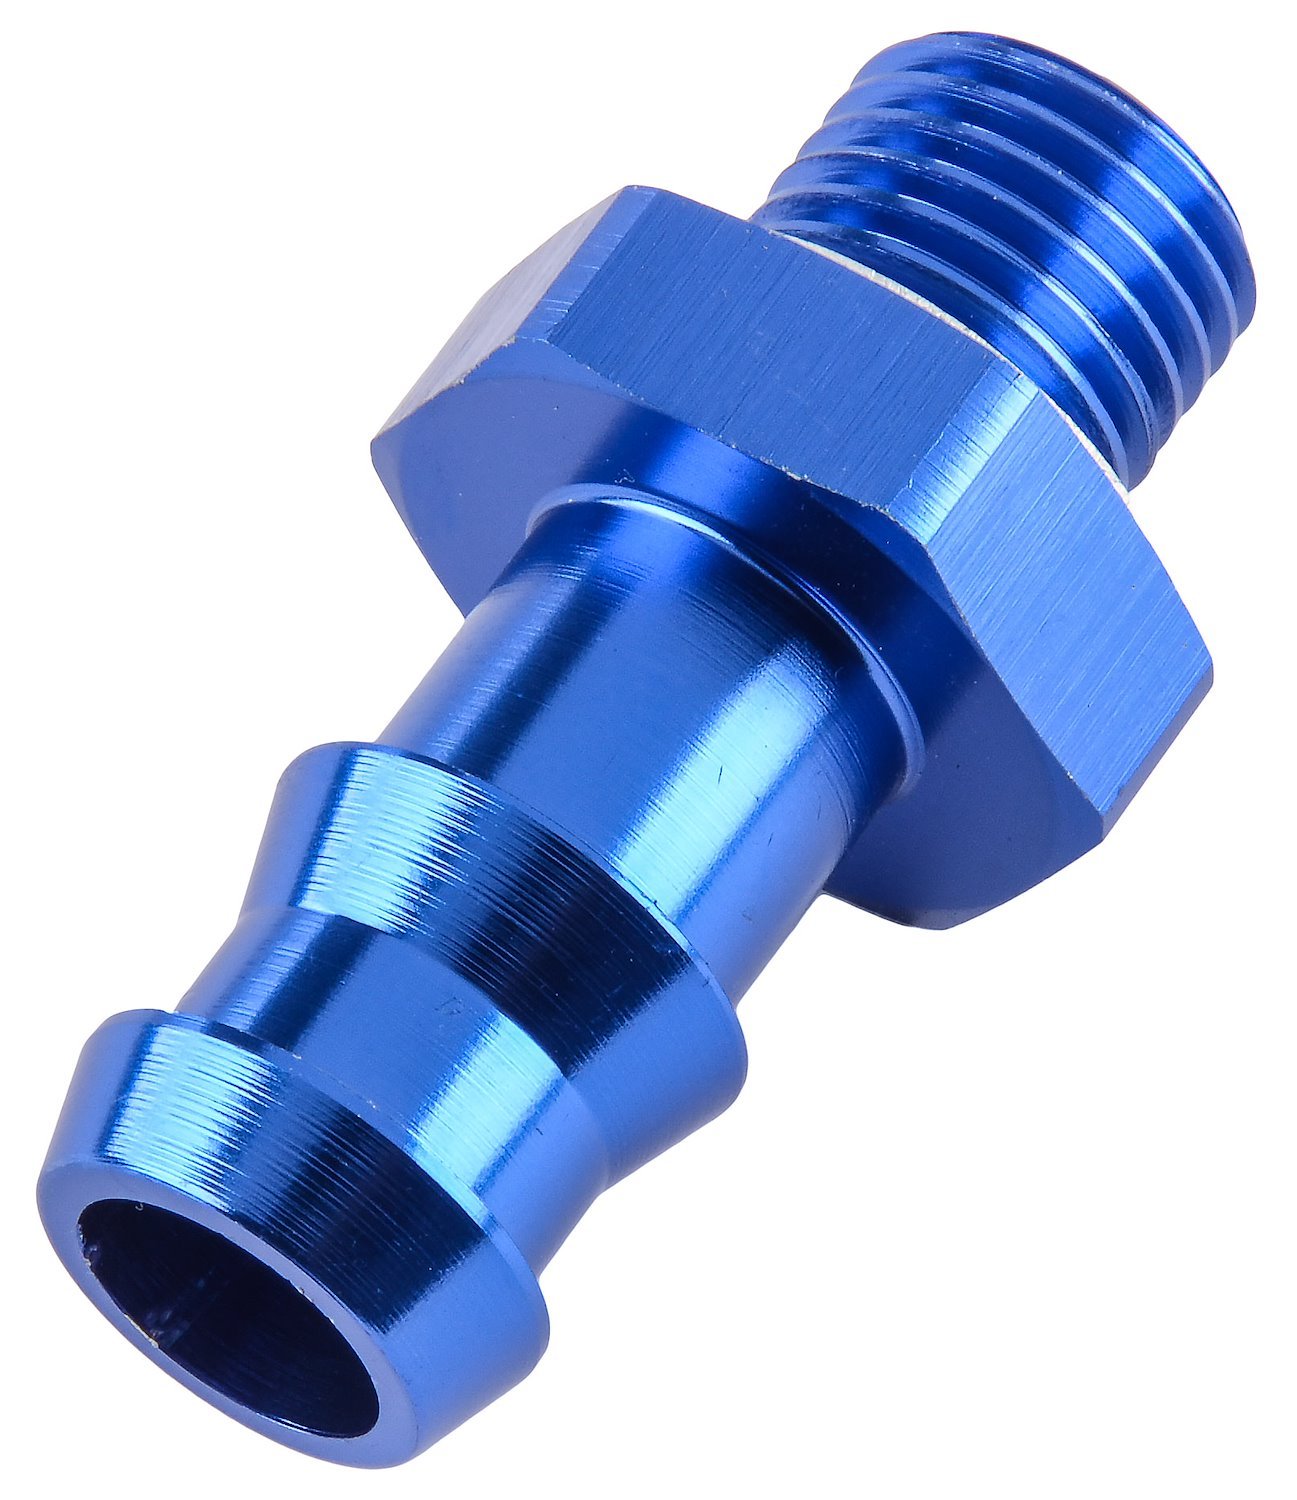 Hose Barb Adapter 14mm x 1.5 Male Straight to 1/2" Hose